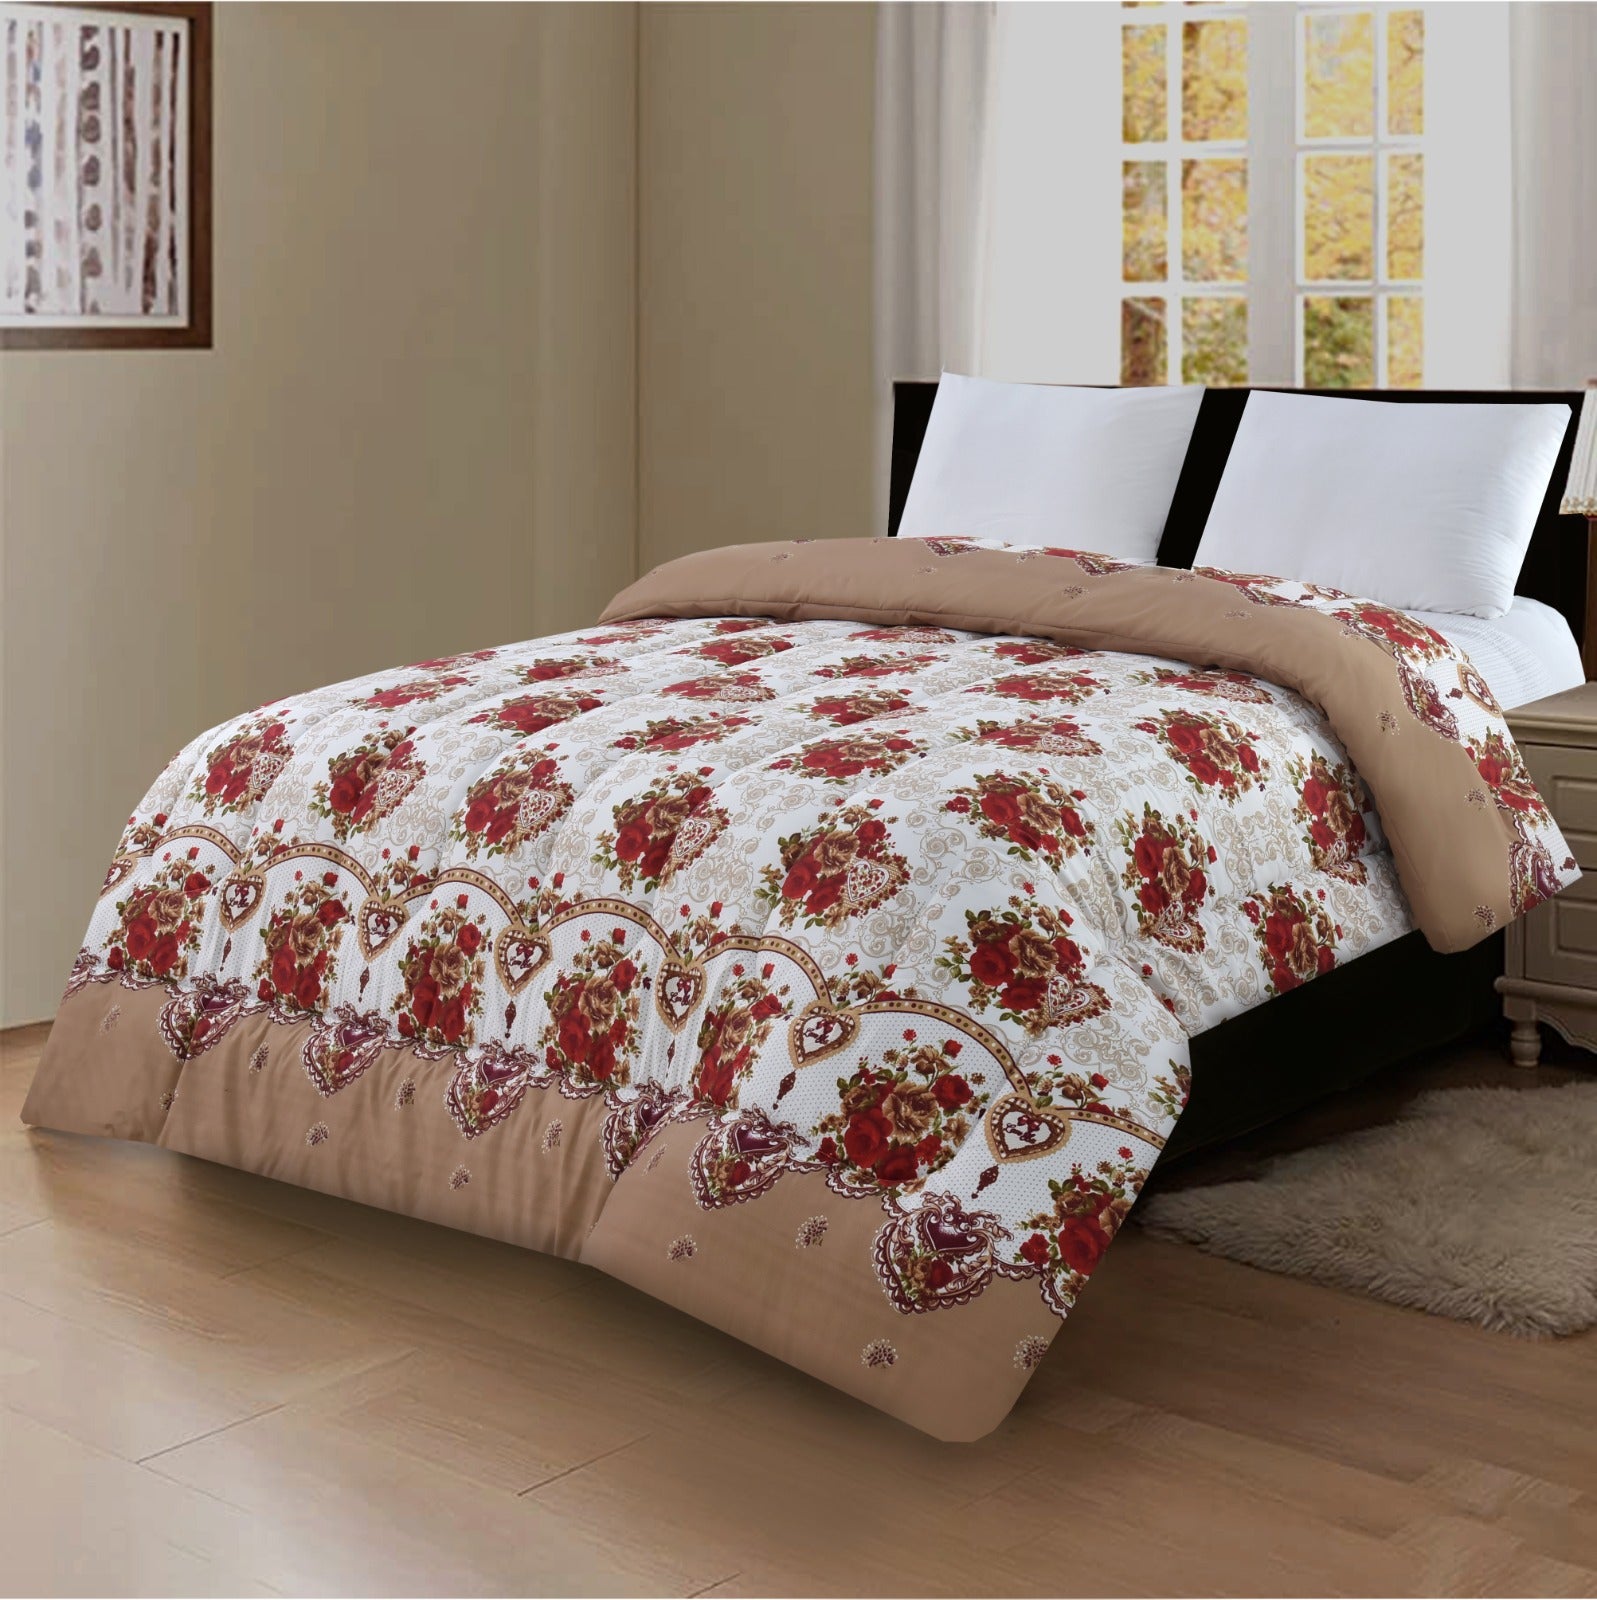 1 PC Double Winter Comforter-Red Roses Apricot